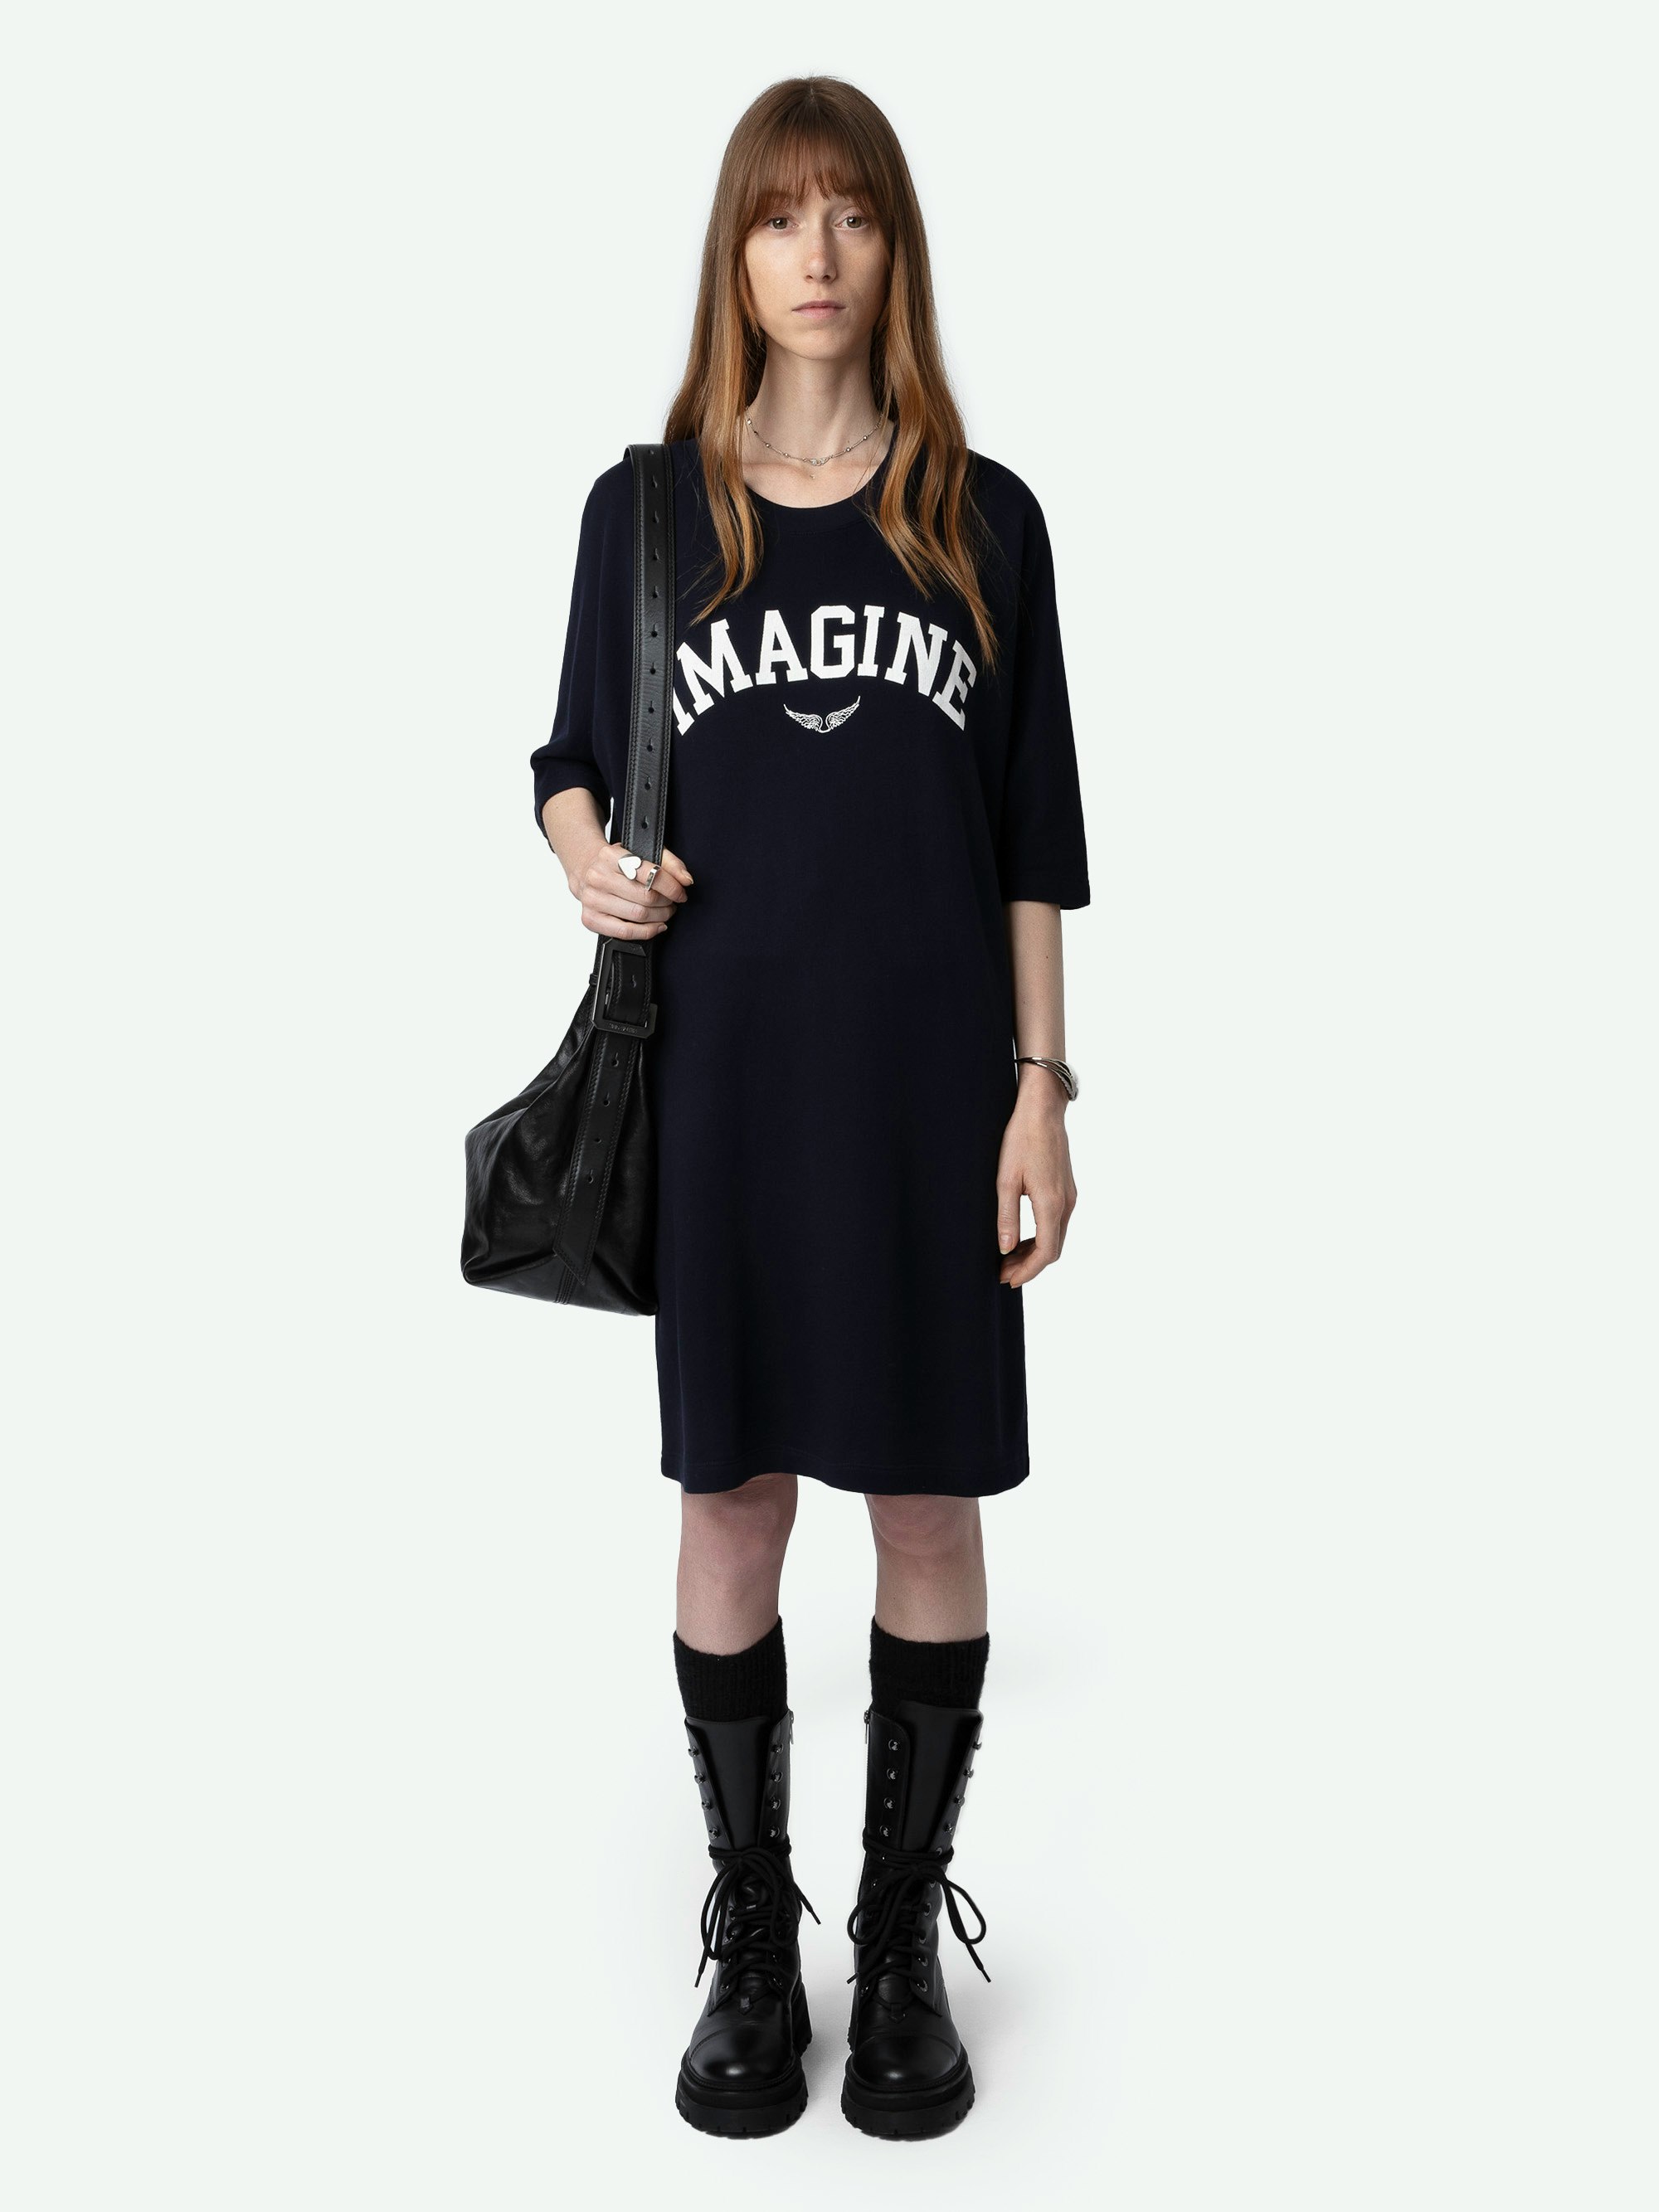 Portman Imagine Dress - Navy blue midi dress with 3/4-length sleeves, ‘Imagine’ prints and wings on the front.